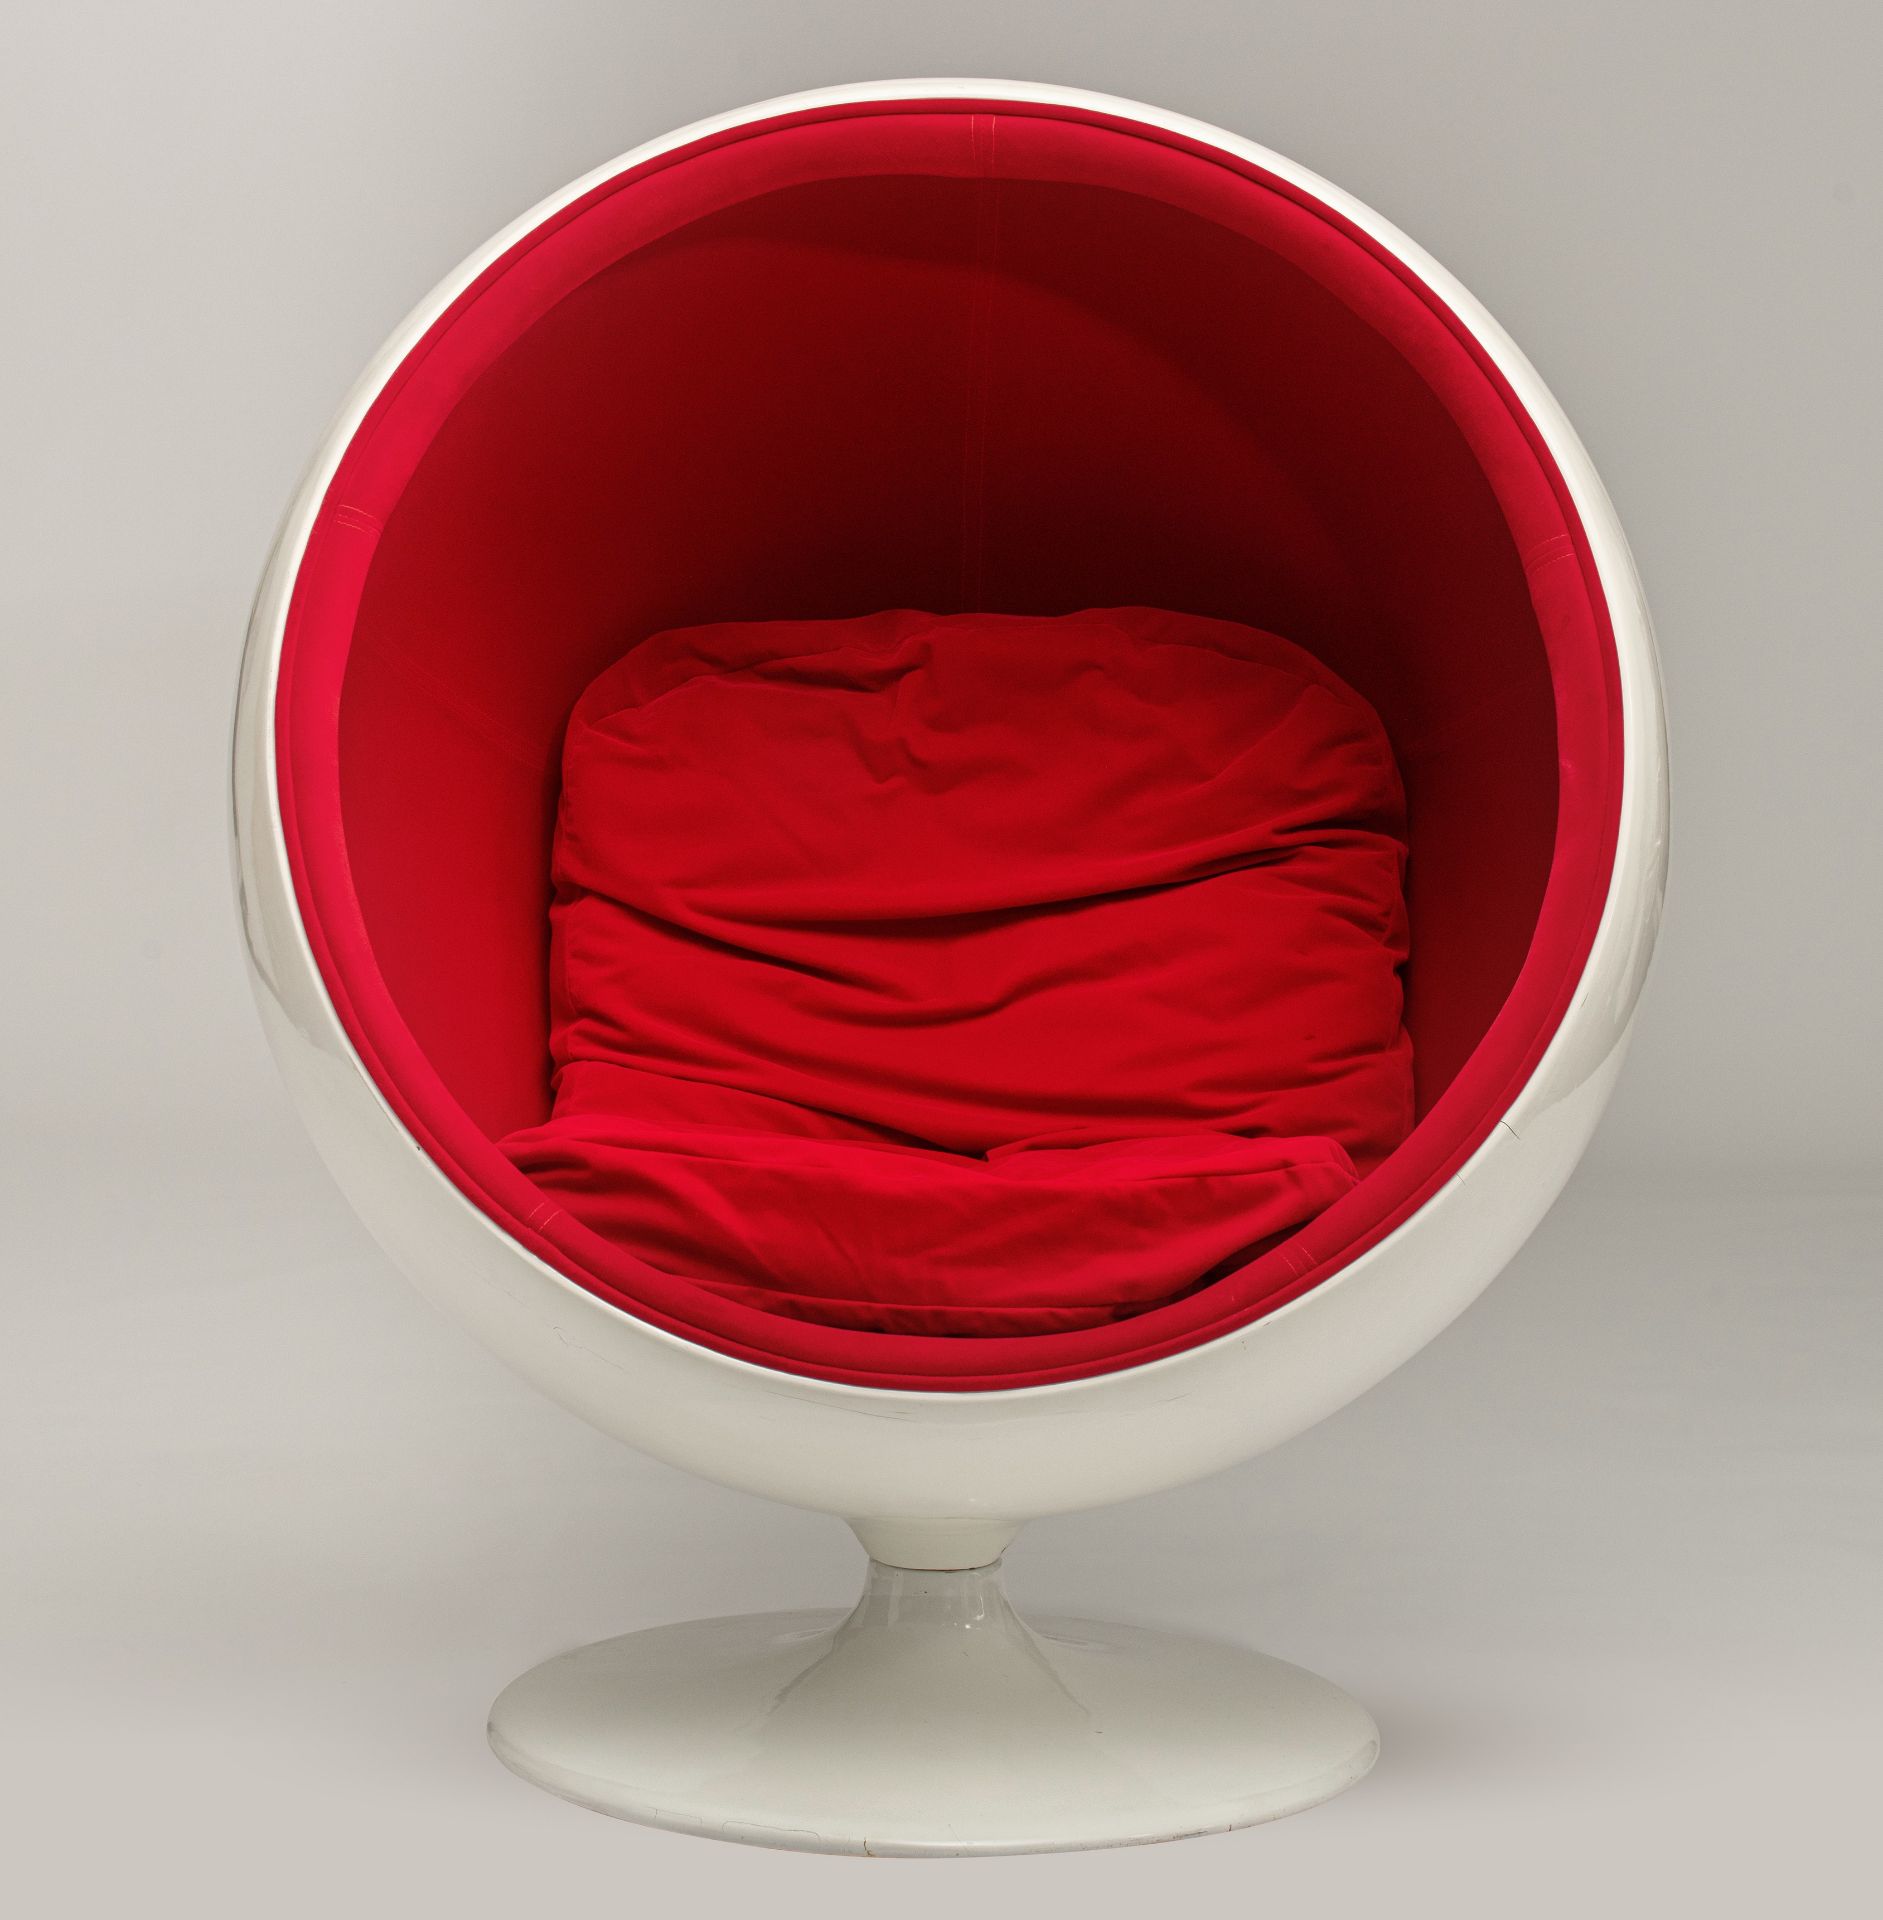 A Globe or Ball Chair by Eero Aarnio, Finland, 1966, H 120 cm - Image 3 of 16